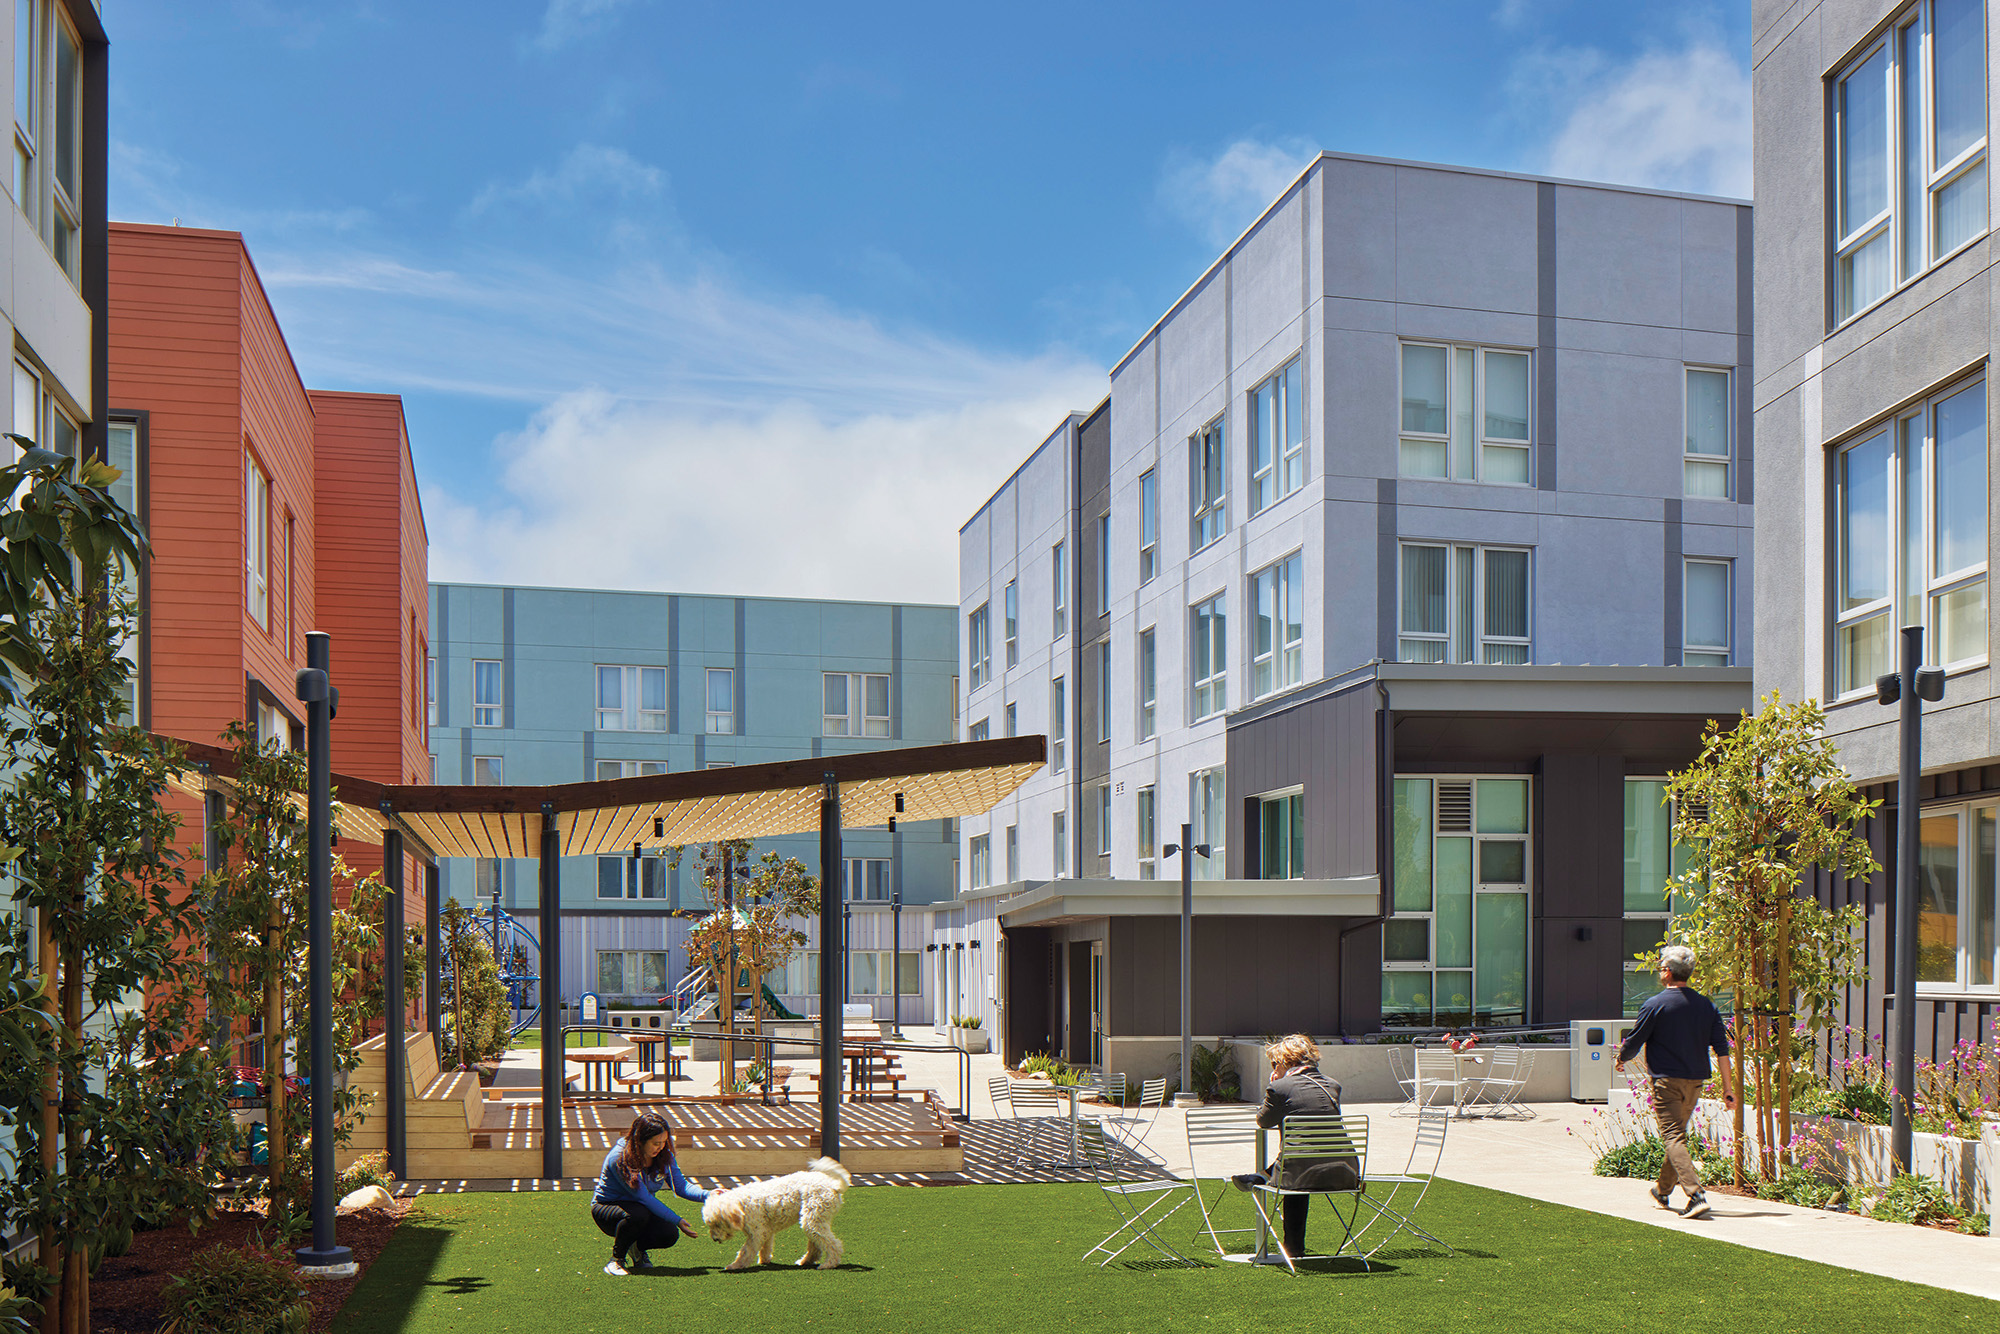 Viz Valley affordable apartments in California